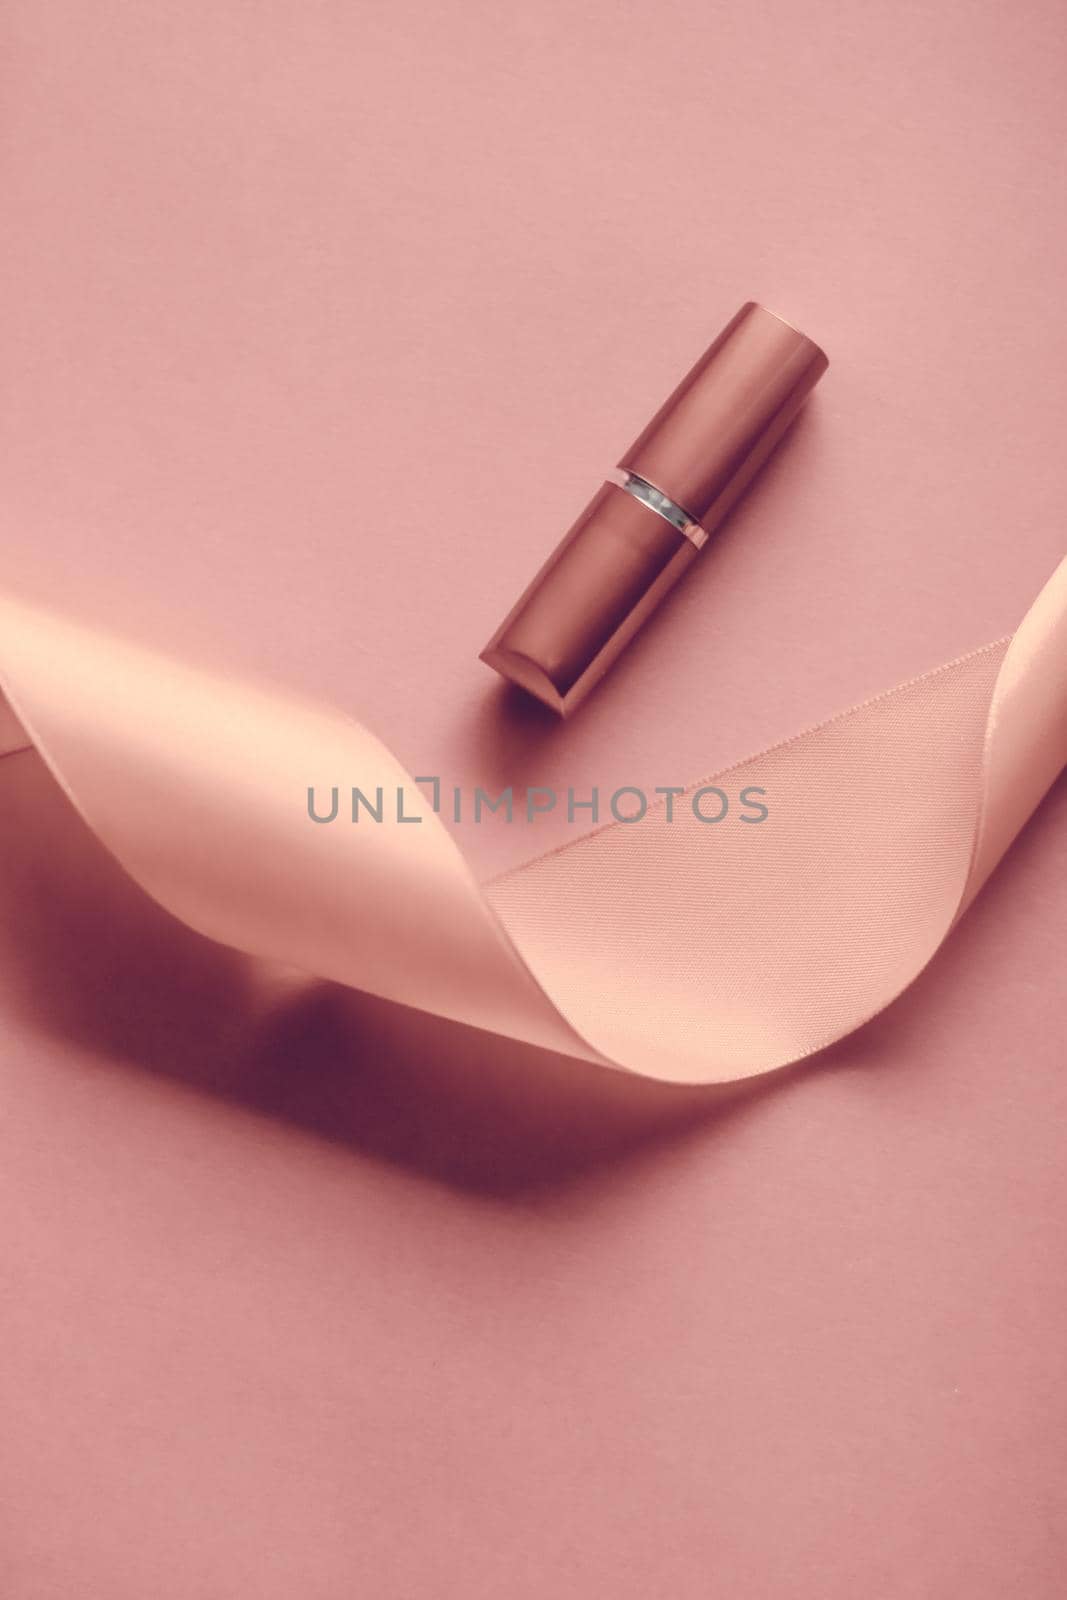 Luxury lipstick and silk ribbon on blush pink holiday background, make-up and cosmetics flatlay for beauty brand product design by Anneleven